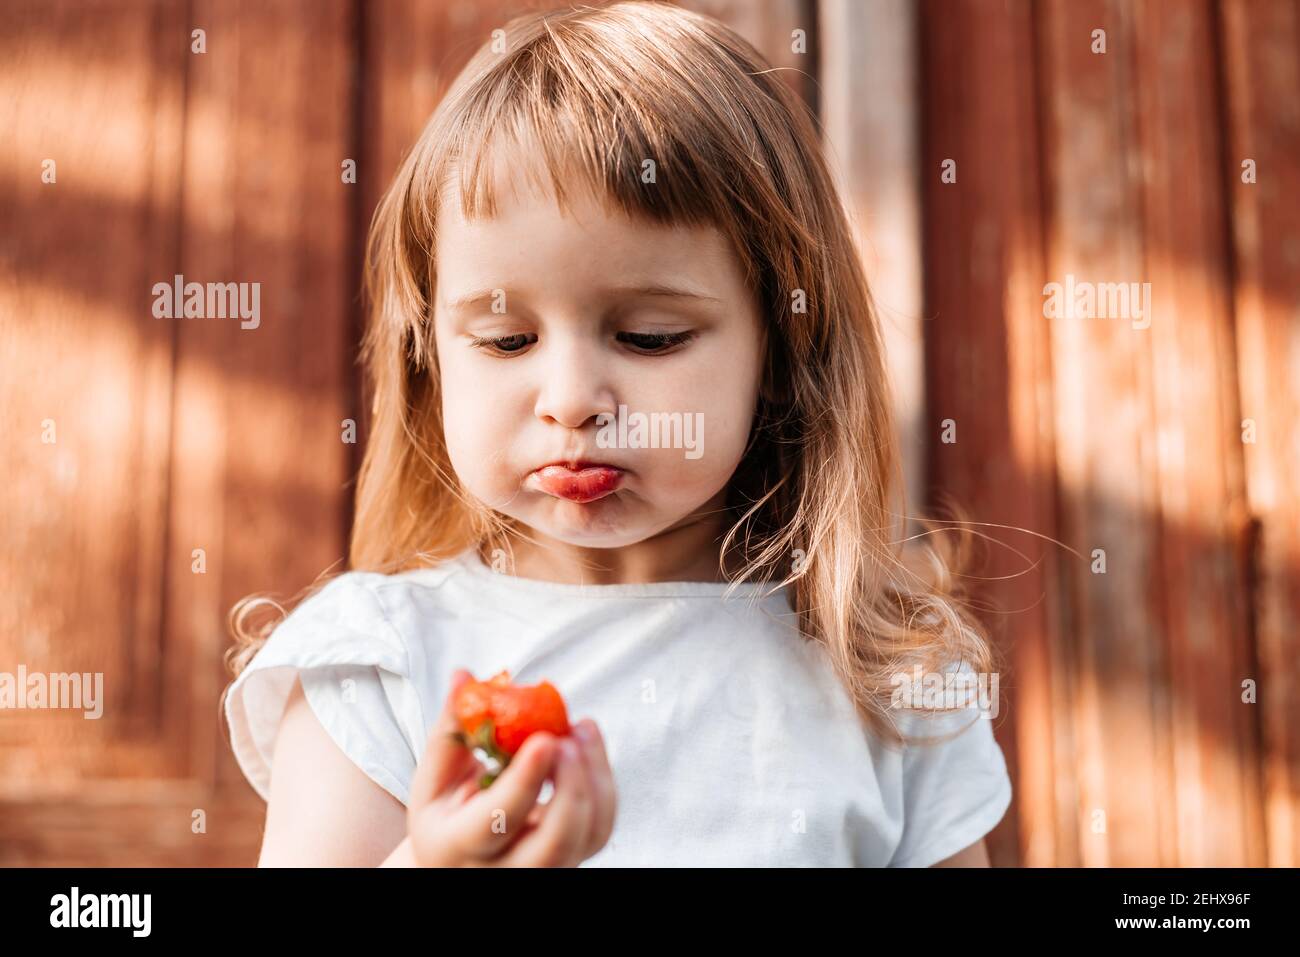 Child with food. Healthy eating Strawberry Stock Photo